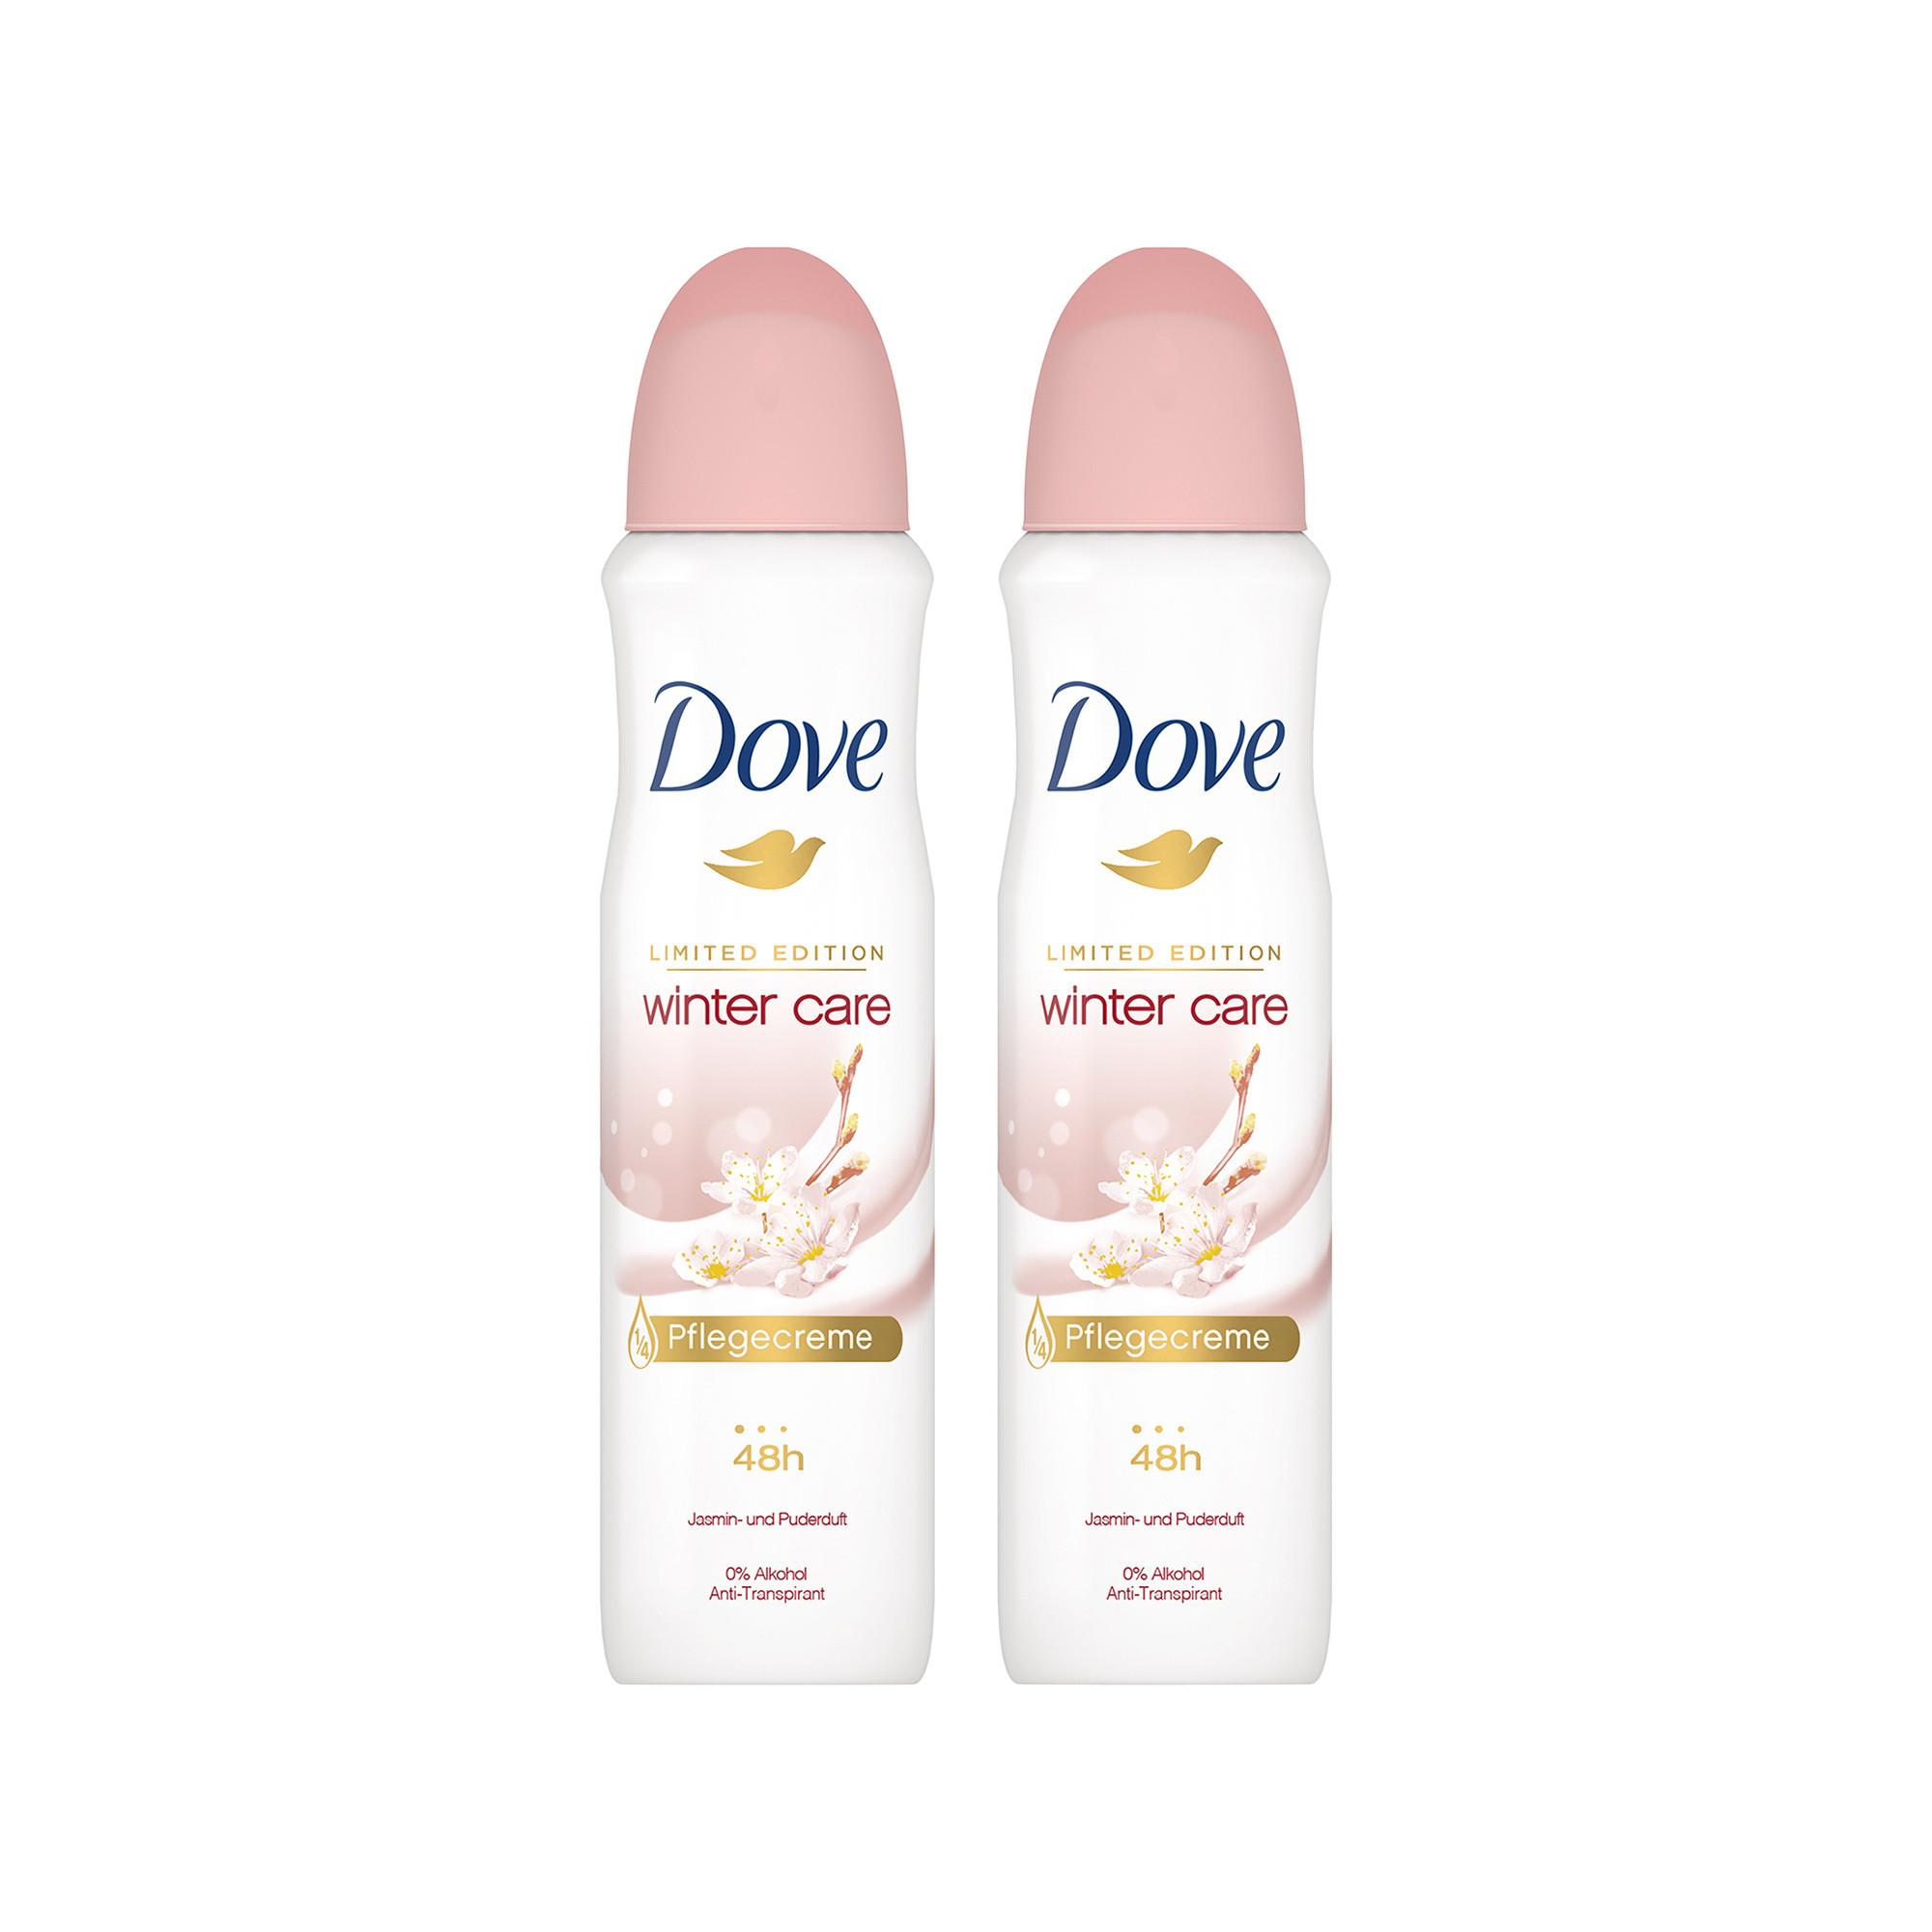 Dove Winter Care deo duo Anti-Transpirant Limited Edition Winter Care Jasmin- und Puderduft Ohne Alkohol Duo 